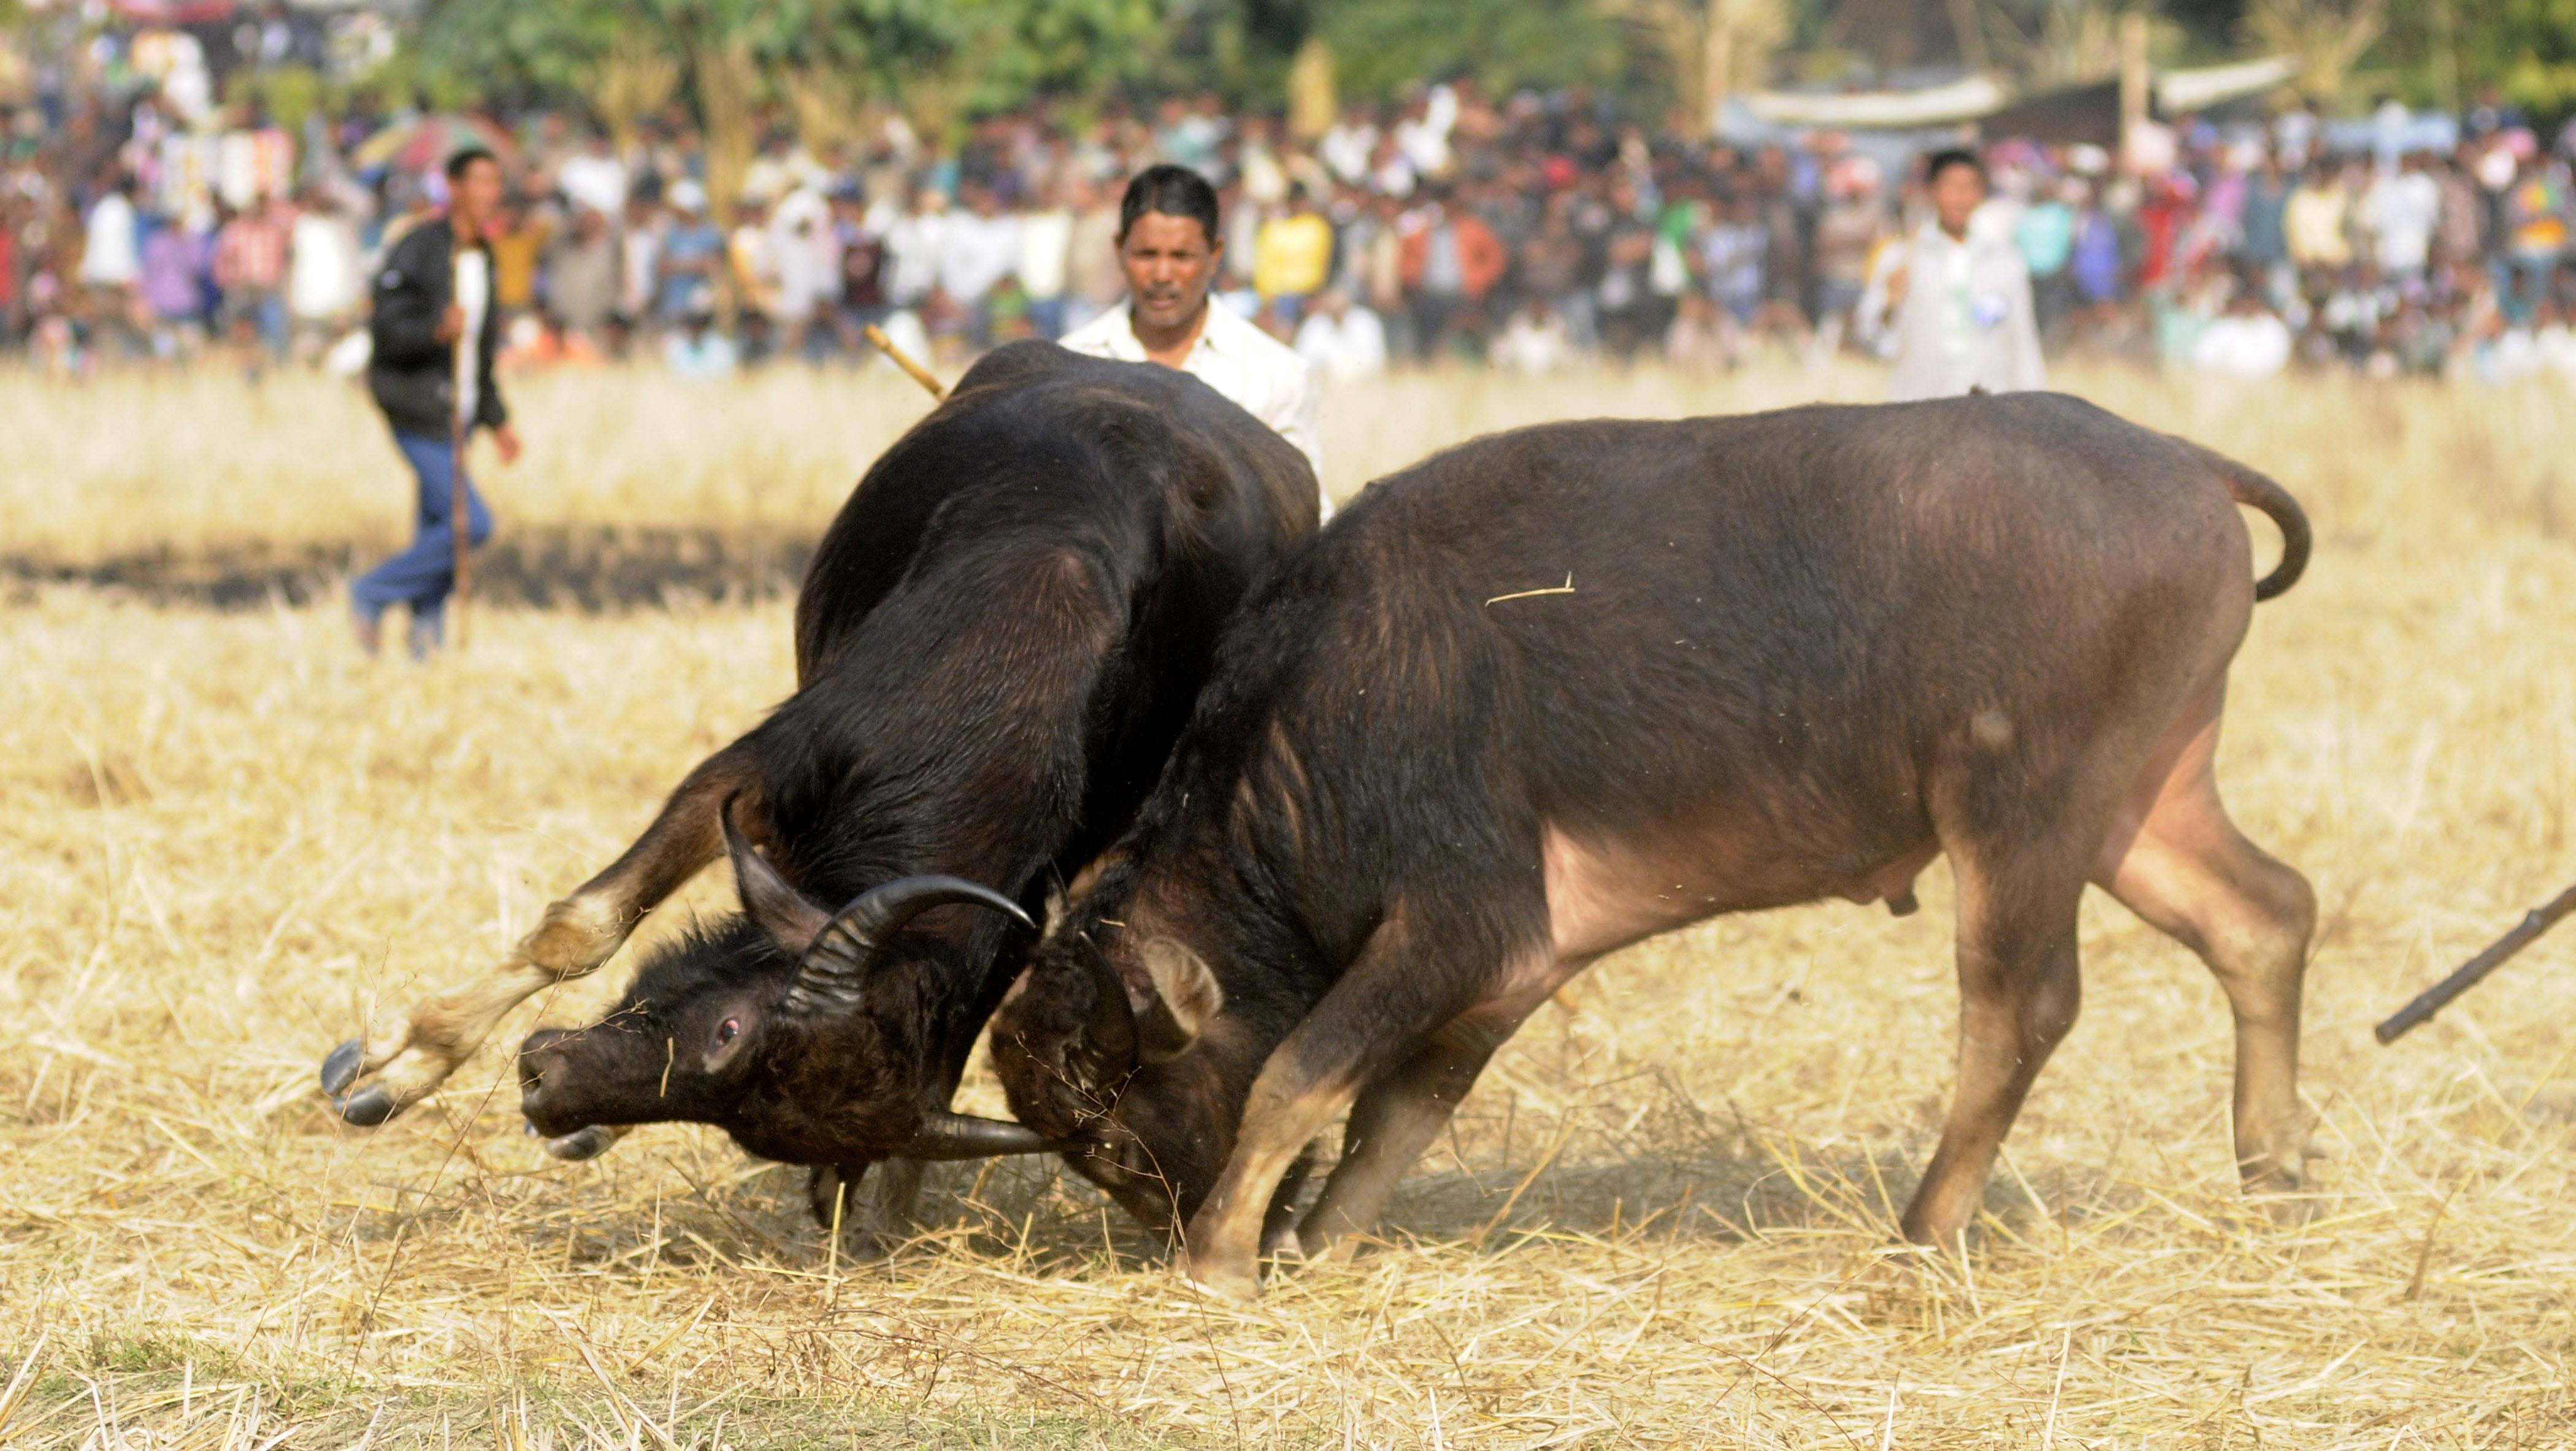 Indians watch a traditional buffalo fight in progress at Ahatguri, some 80 kms away from Guwahati, the capital city of Indias northeastern state of Assam on 15 January 2014. The age-old buffalo fight is organised on the occasion of the harvest festival 'Bhogali Bihu' in Assam.